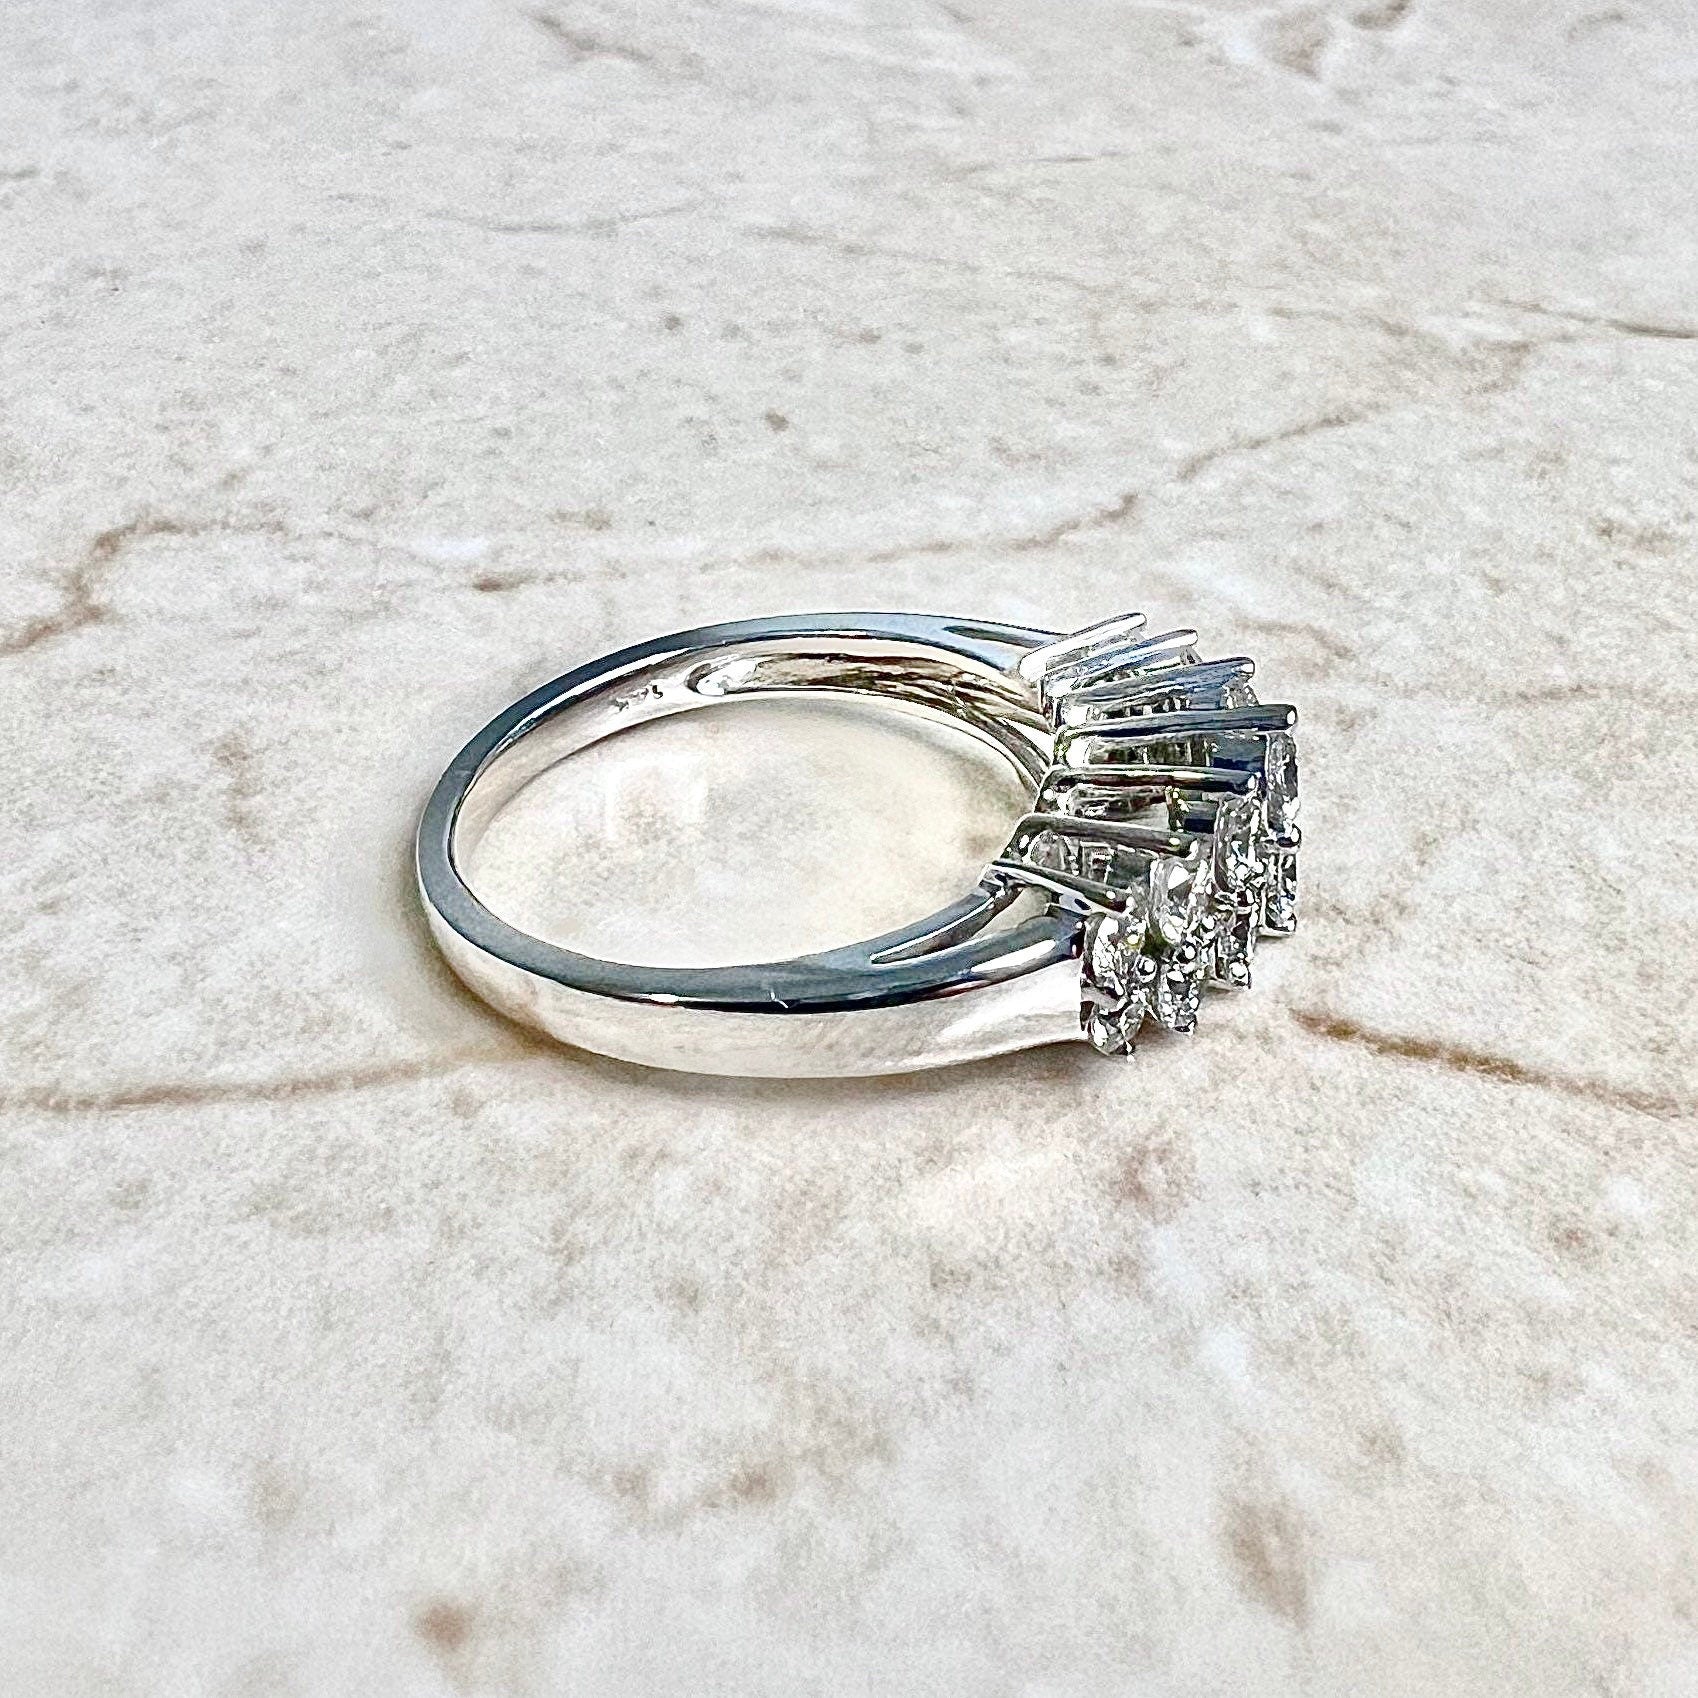 1 CTTW Vintage 14K Double Row Diamond Band Ring - White Gold Diamond Ring - Diamond Wedding Ring - Anniversary Ring - Best Gifts For Her